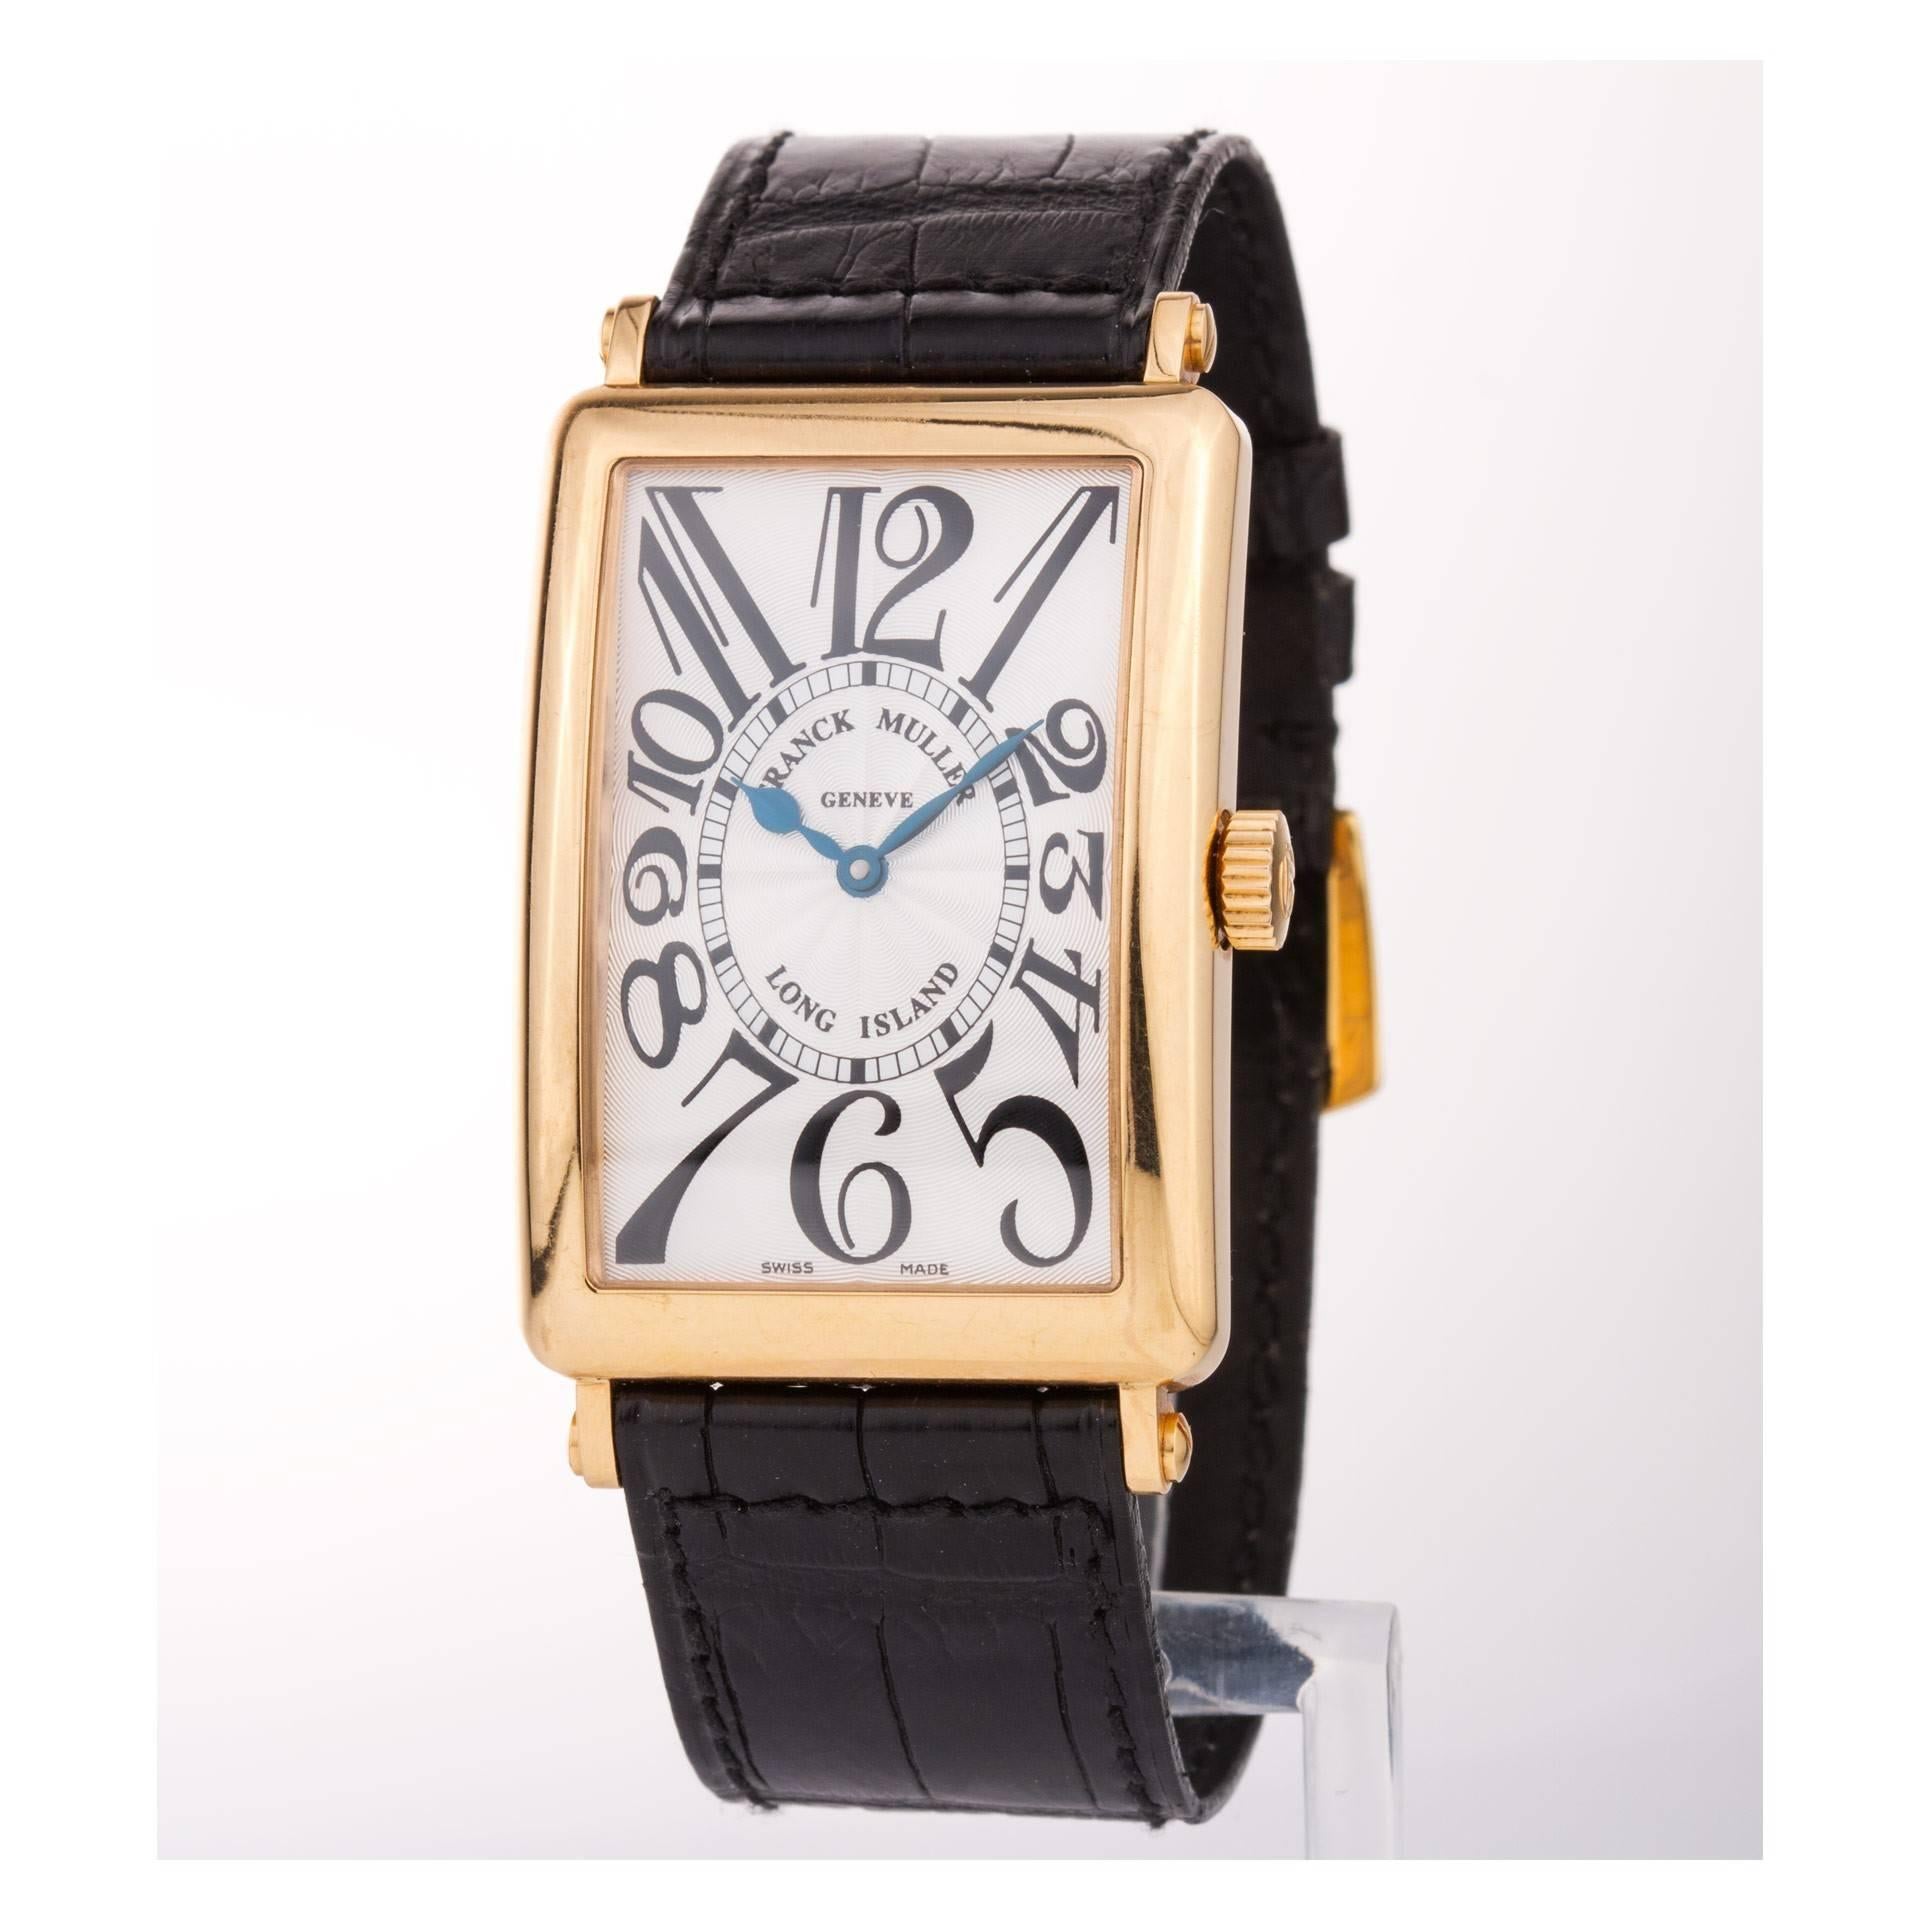 FRANCK MULLER LONG ISLAND, Master of complications 1000 SC
yellow gold case, black leather strap, automatic winding
